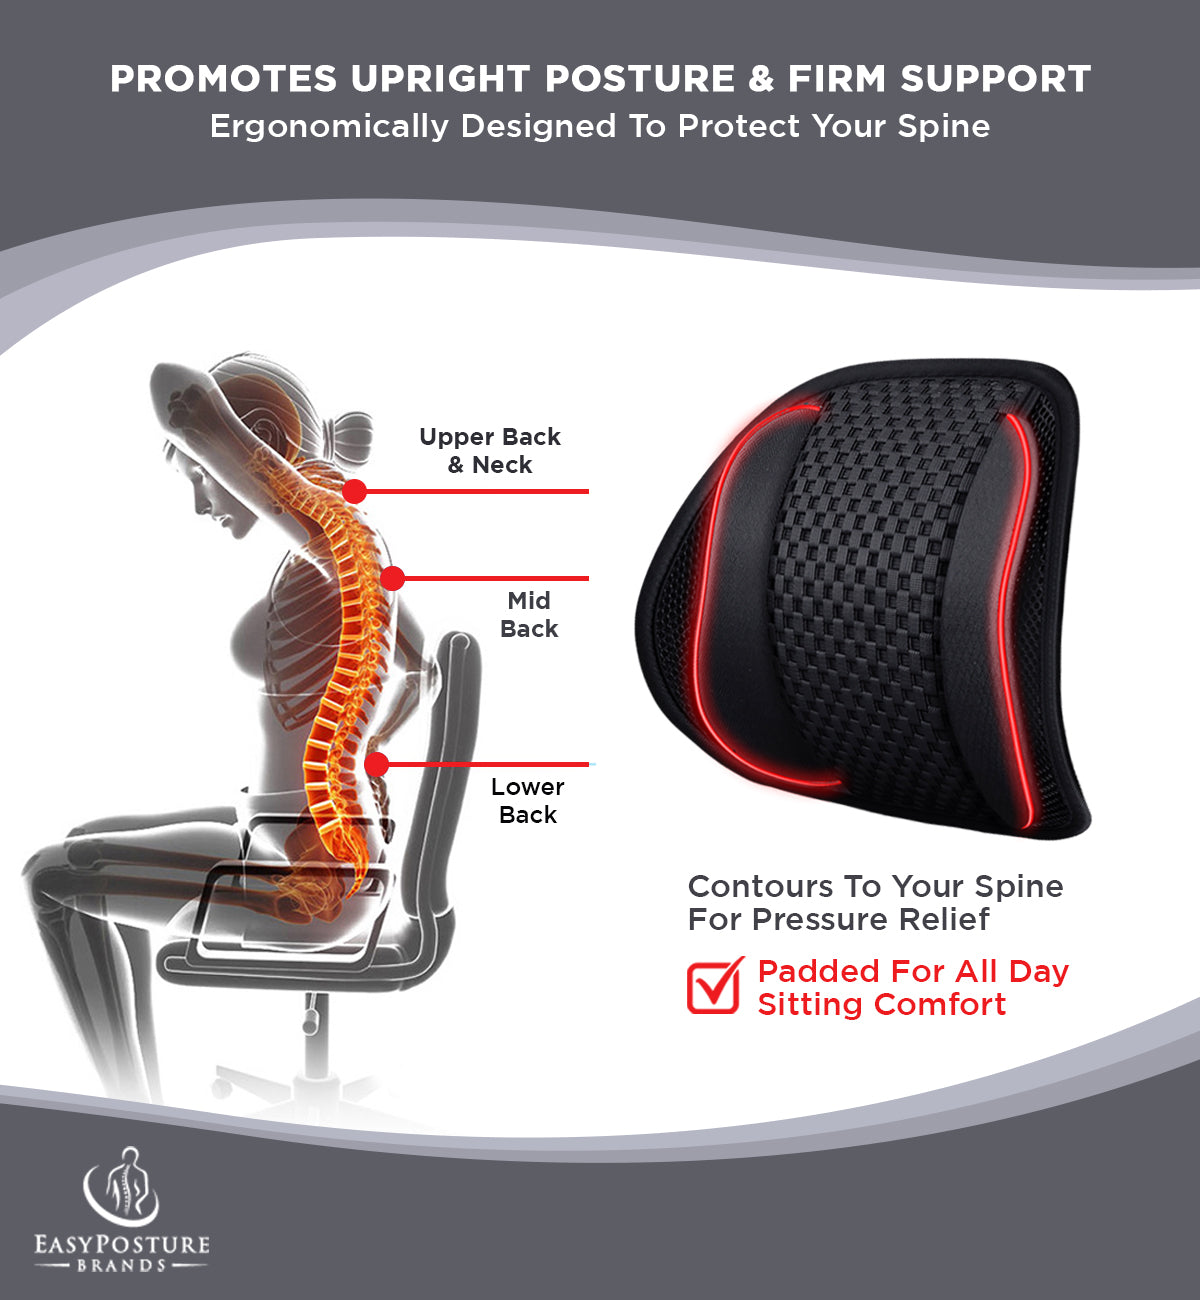 Lumbar Support for Car (2 Pack) - Padded w/Mesh Back Support Easy Posture Brands 